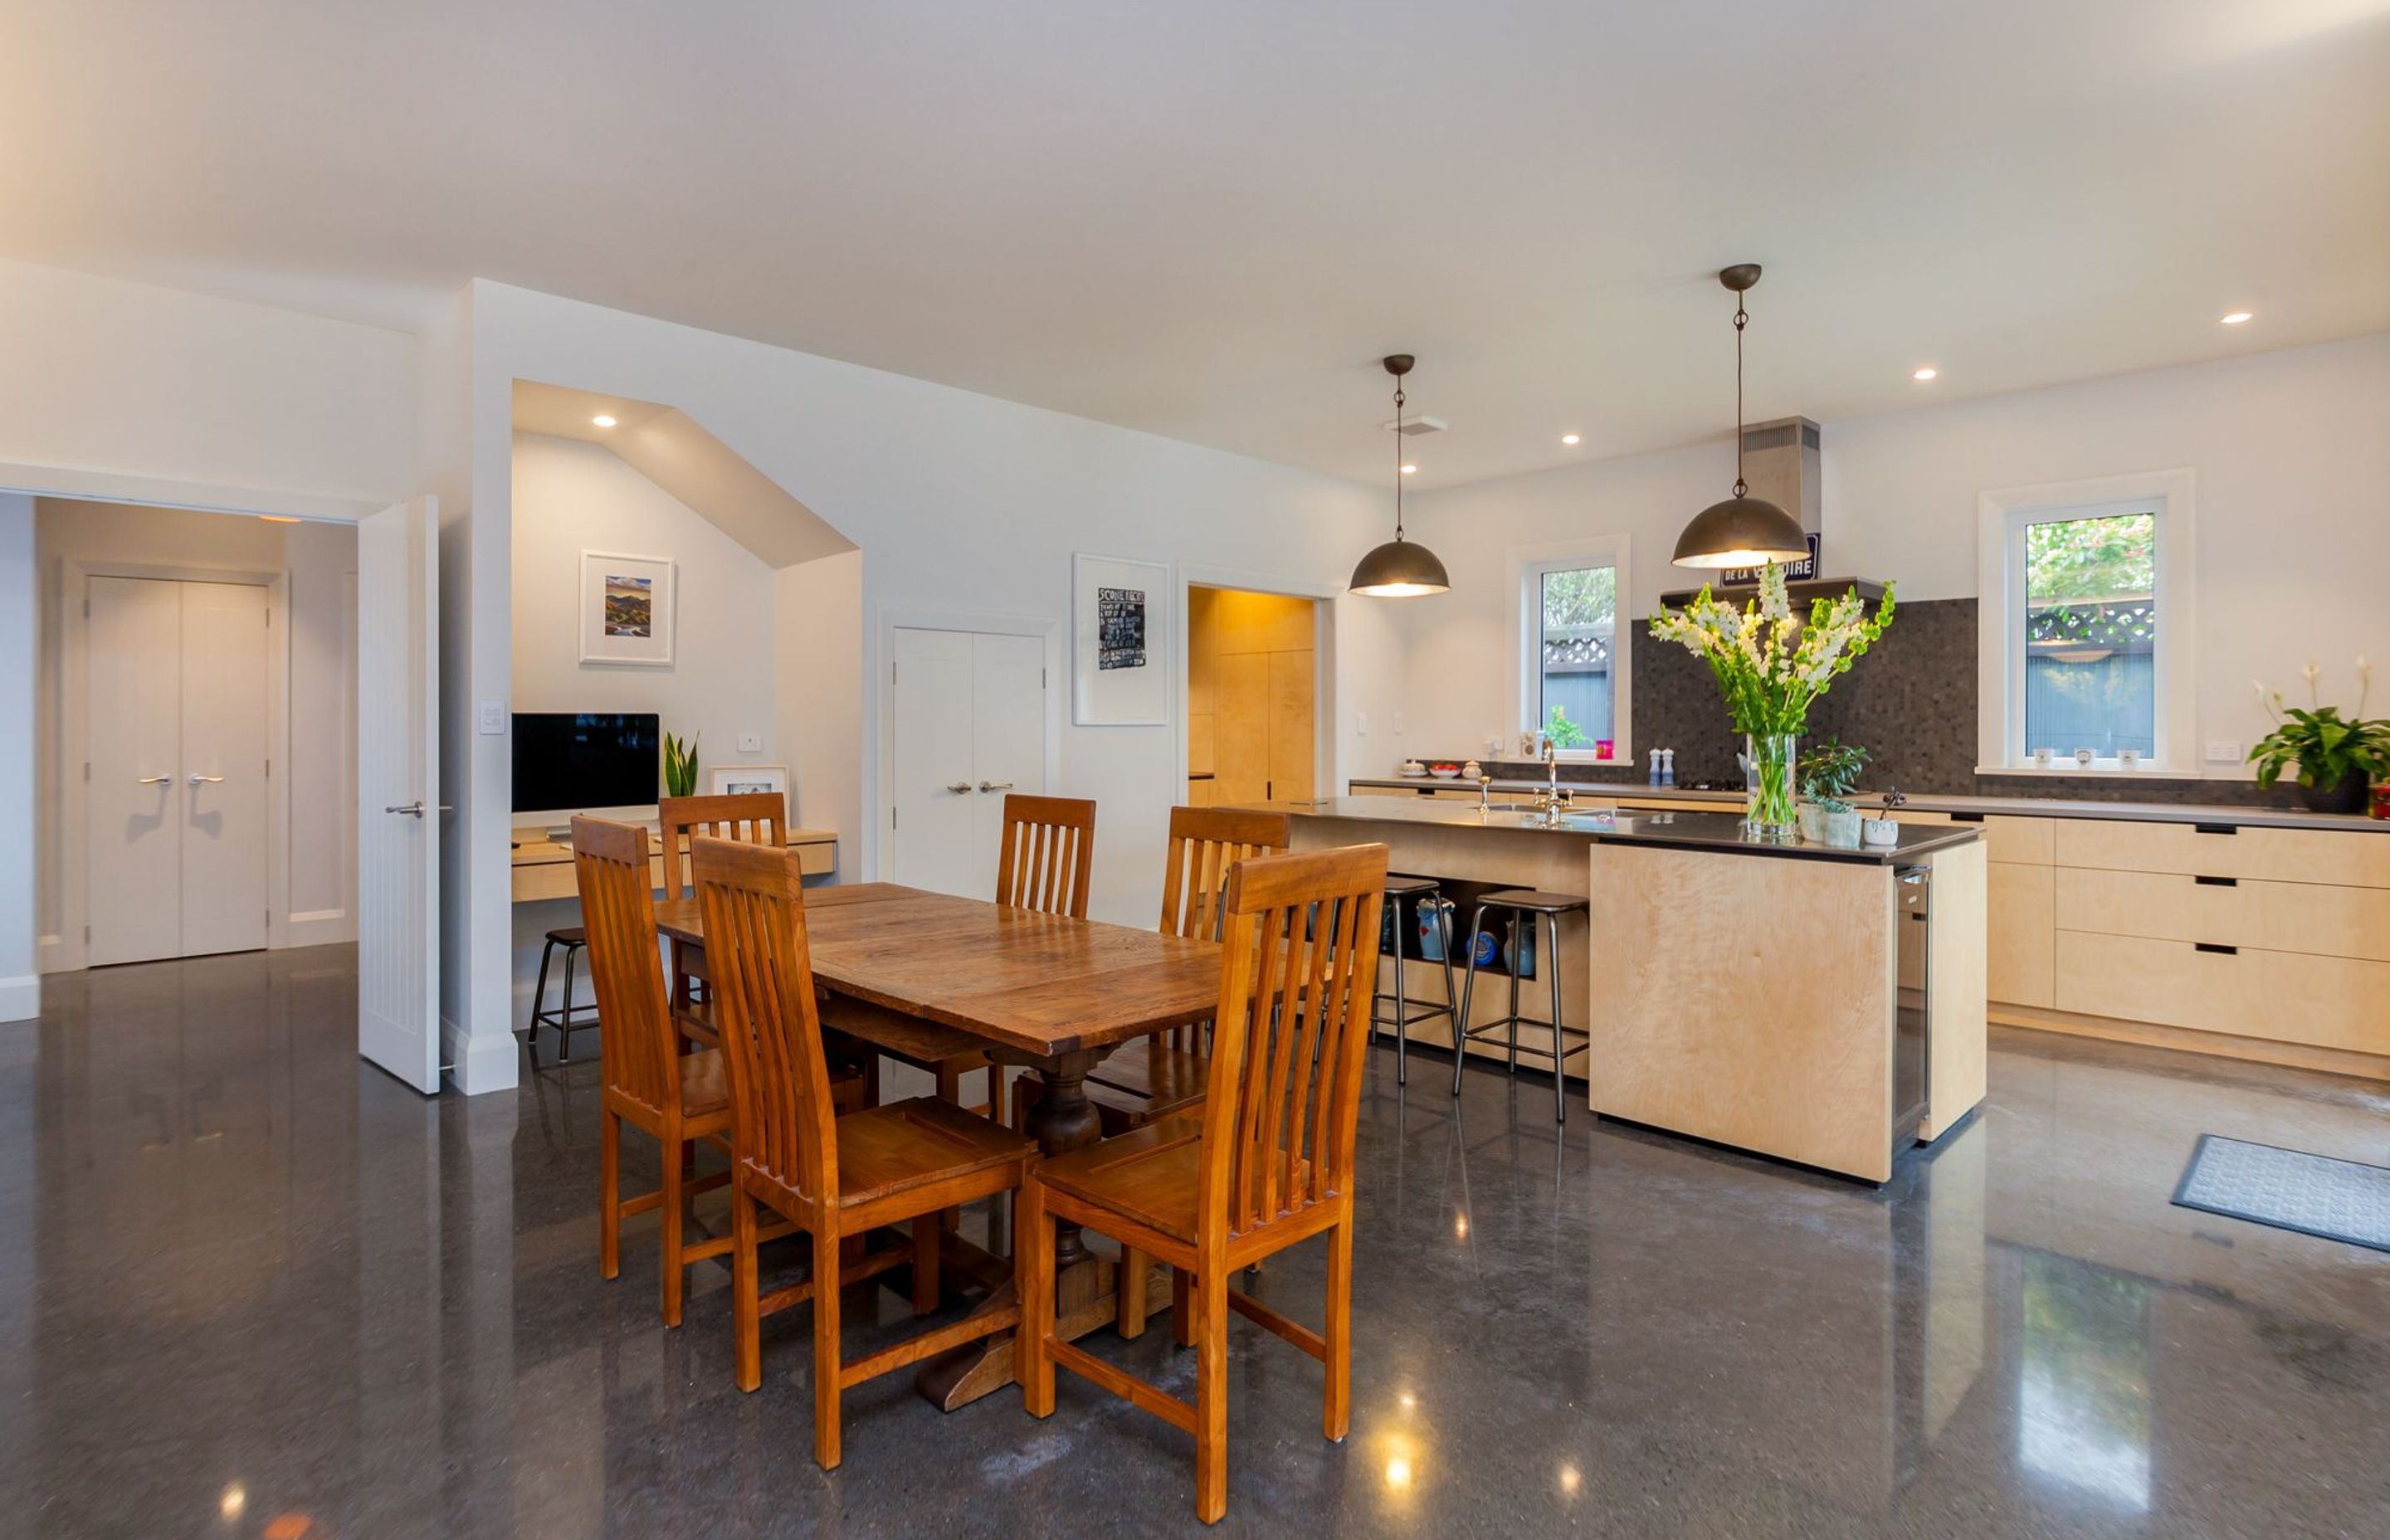 Polished concrete floors in the kitchen and dining.